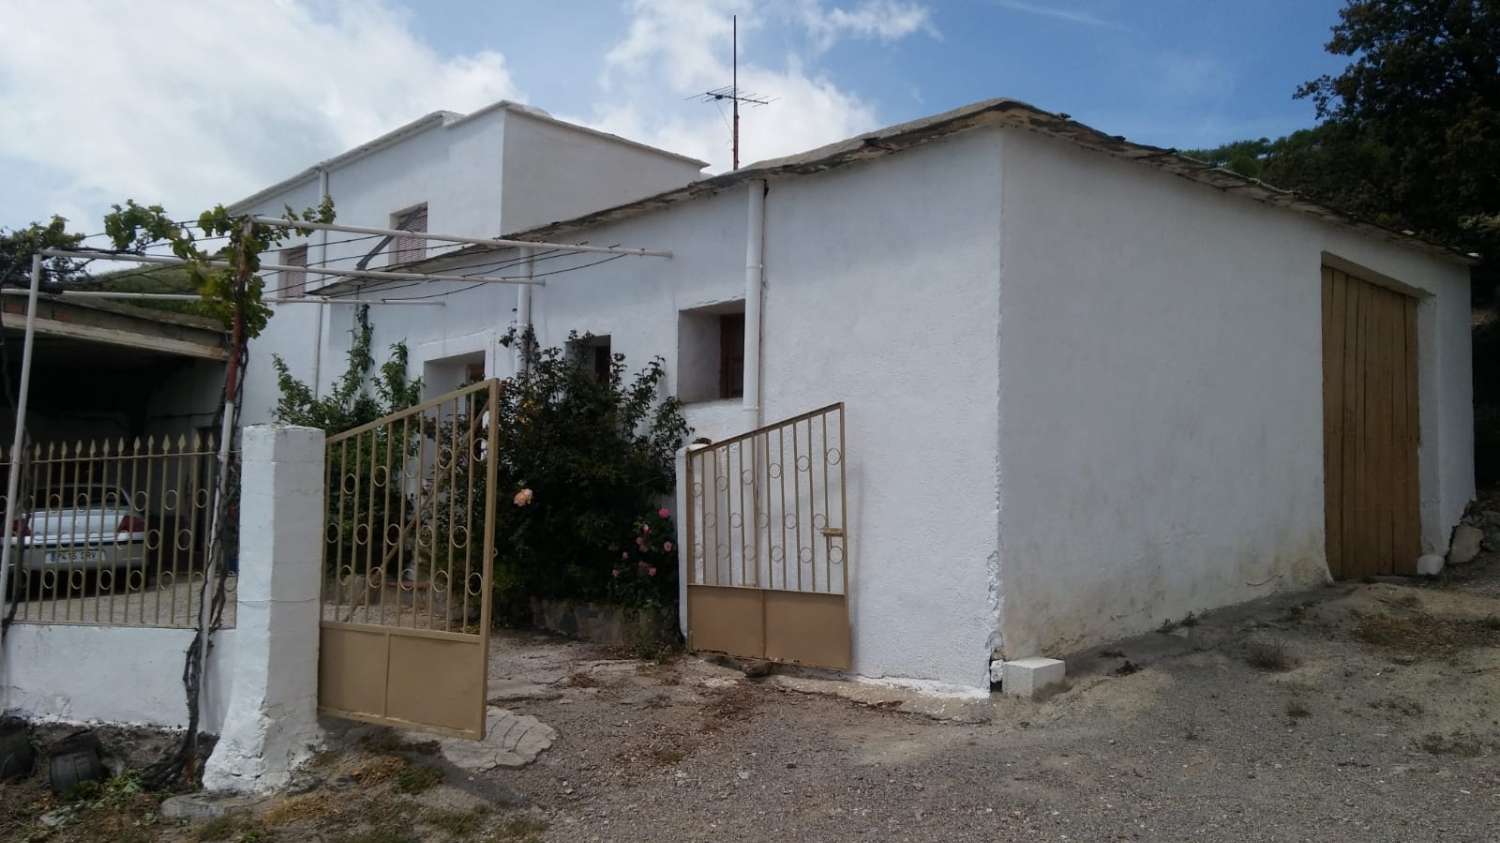 Renovated farmhouse with warehouse and views in Torvizcón, Granada